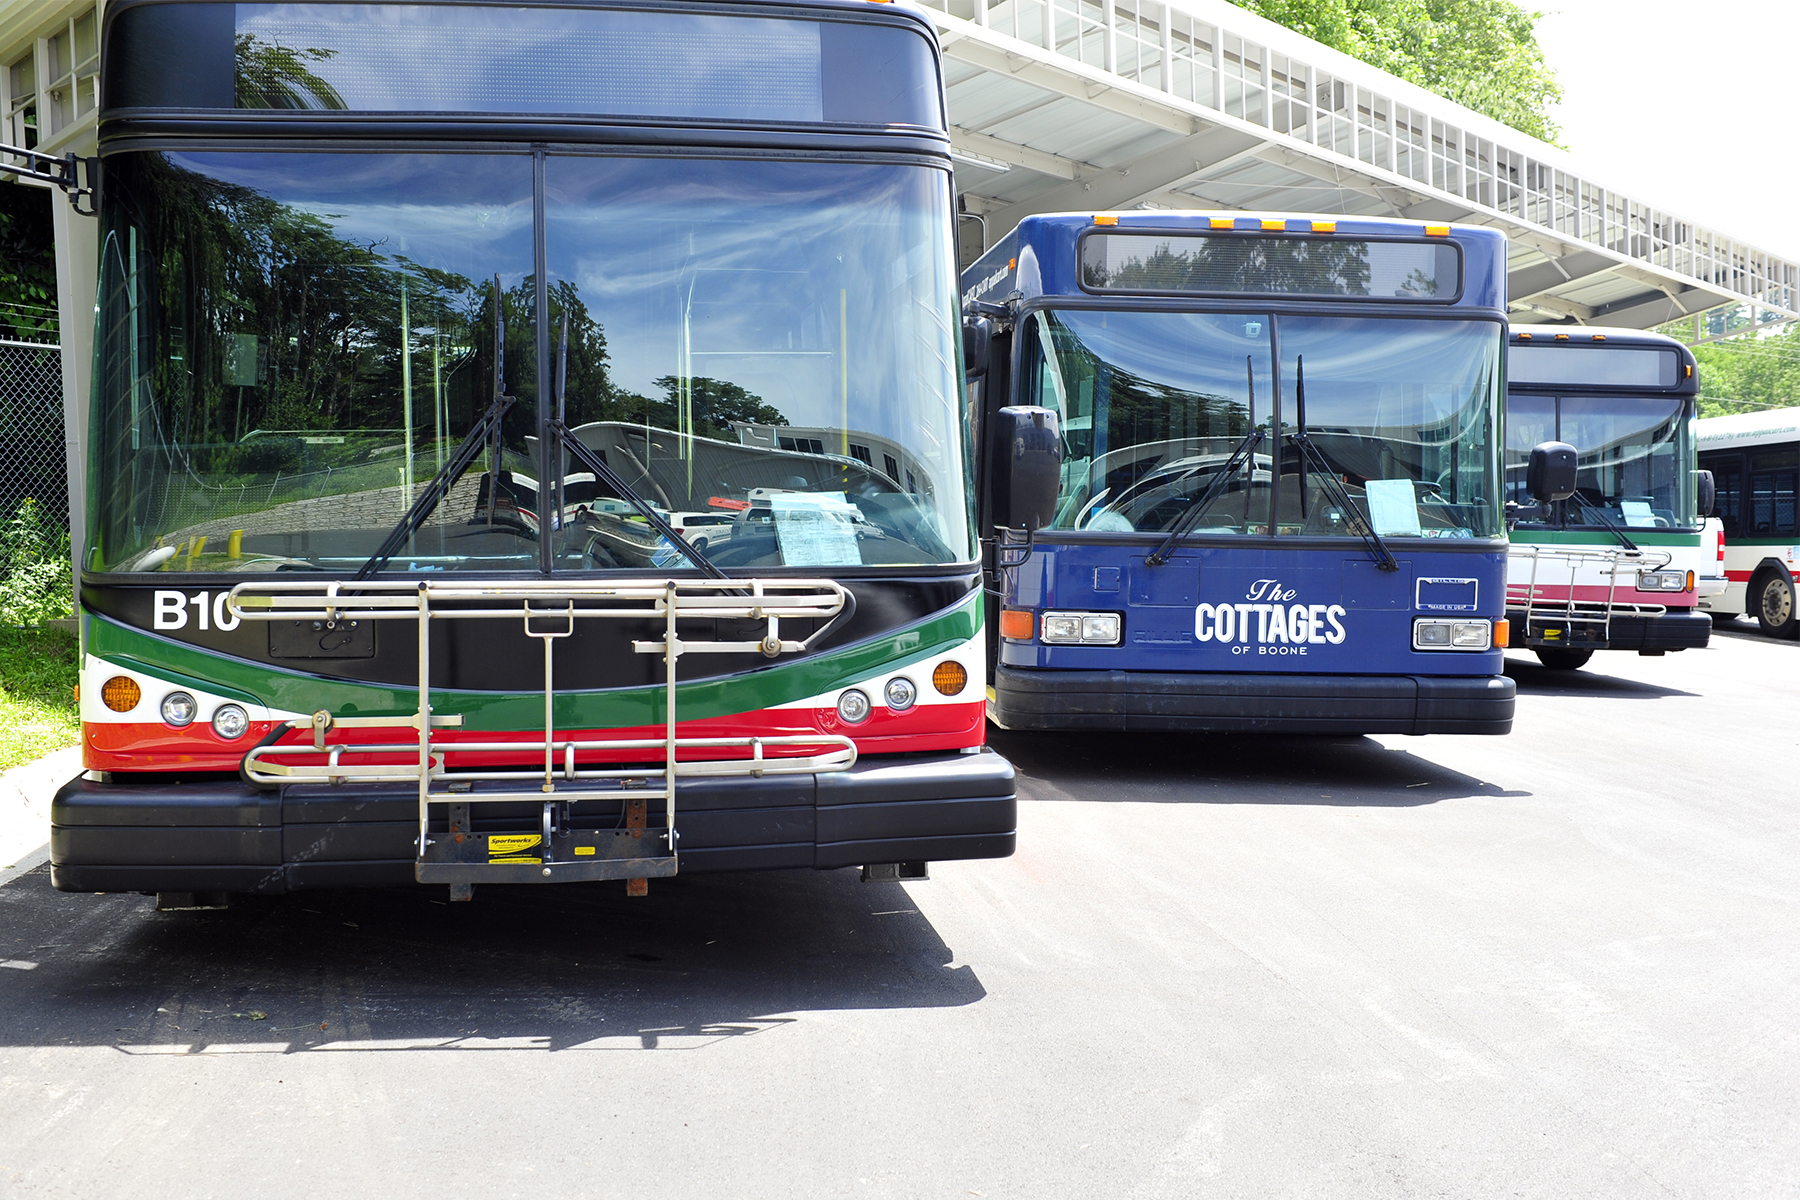 three buses are parked side by side near each other